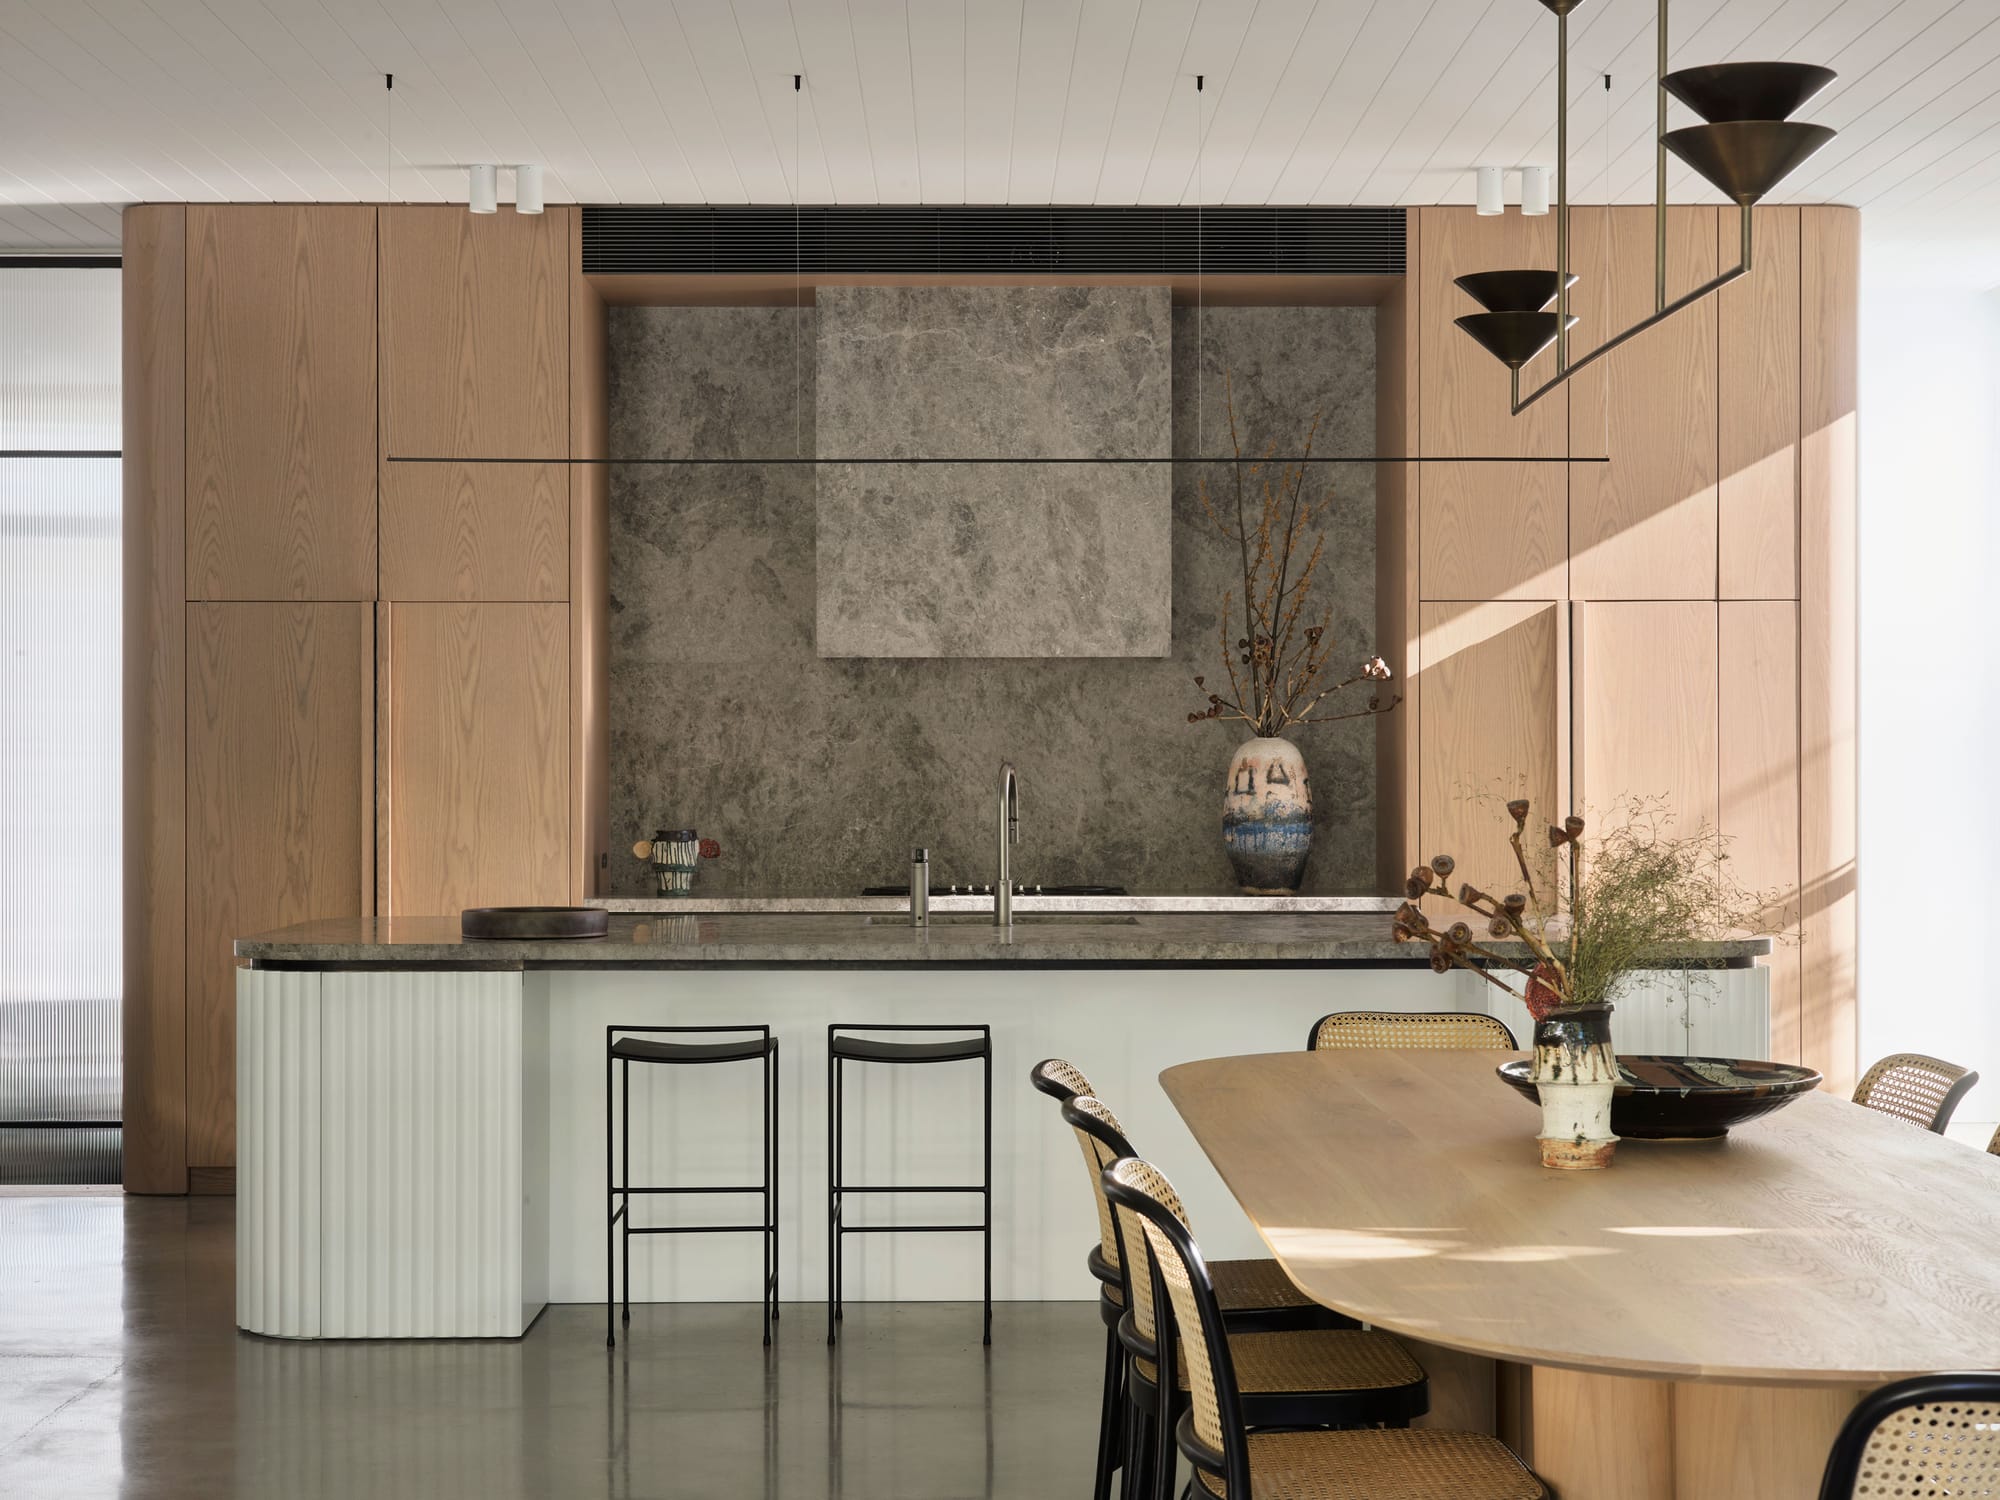 Warren House by CM Studio. Photography by Nic Gossage. Timber cabinetry in kitchen with white island bench. Grey stone splashback and countertops. 